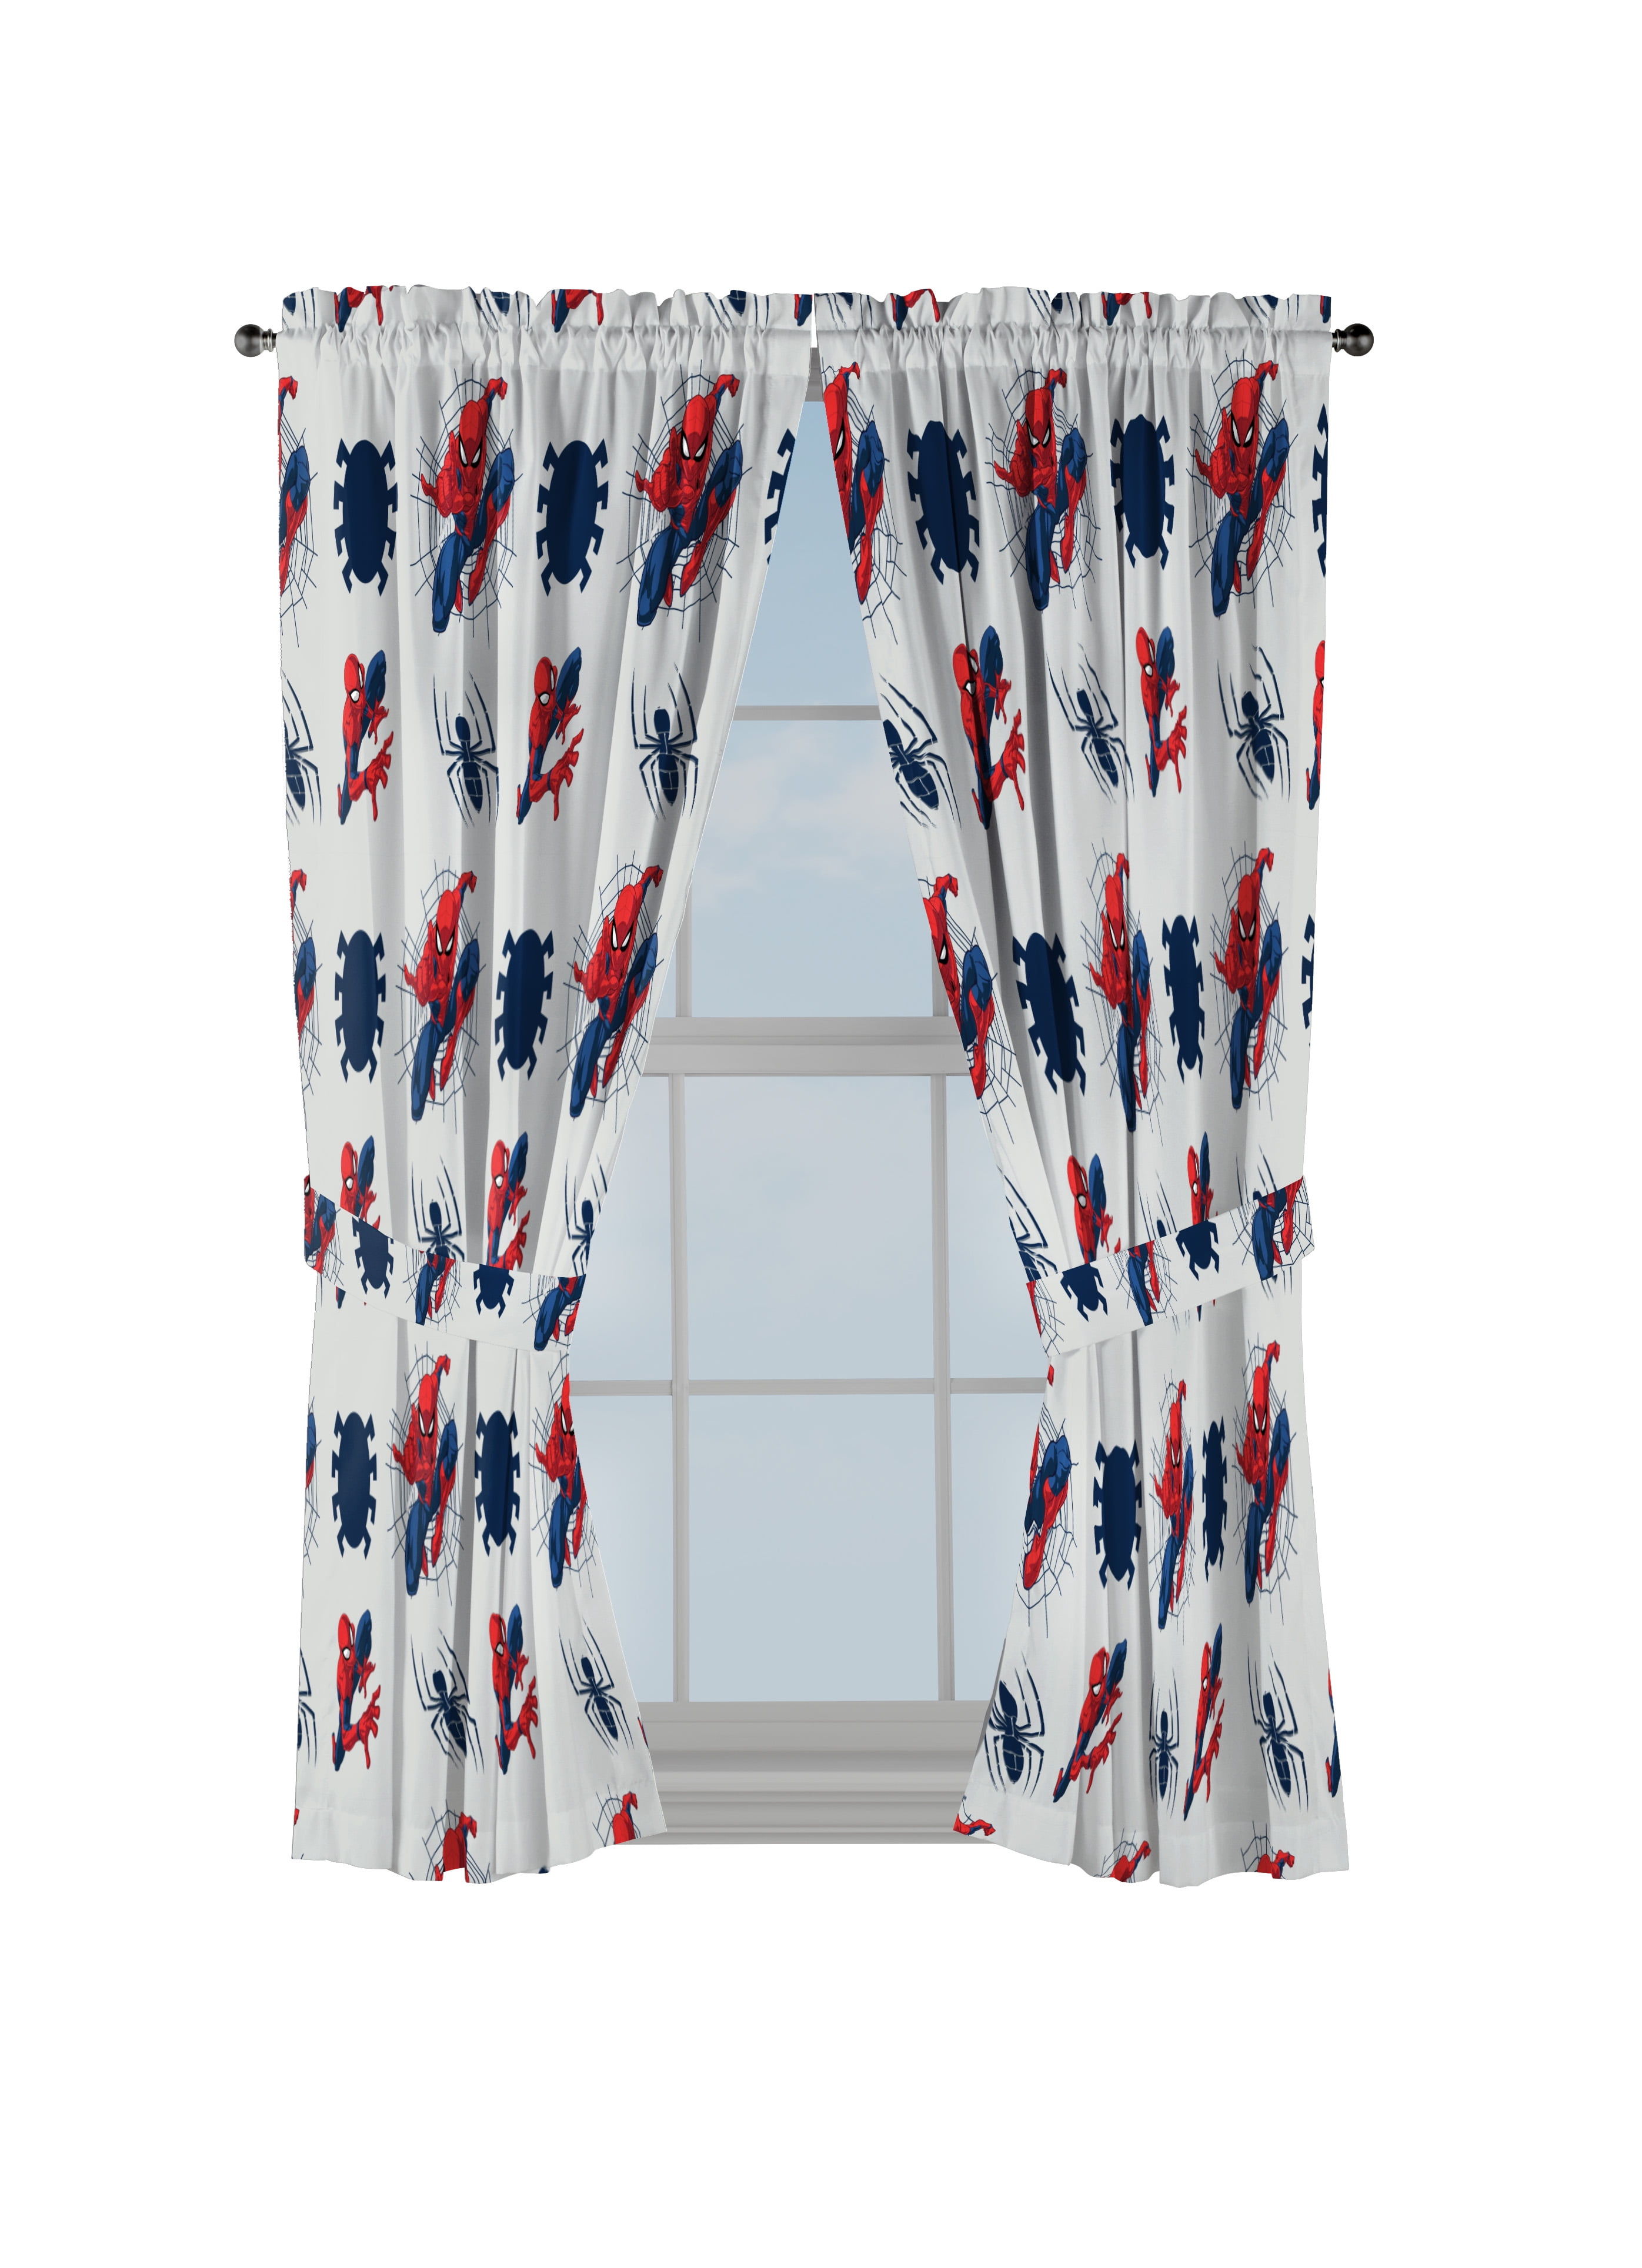 Spiderman soft microfiber 42 by 63 Inch Curtain Panel Pair with Tie Backs Blue 